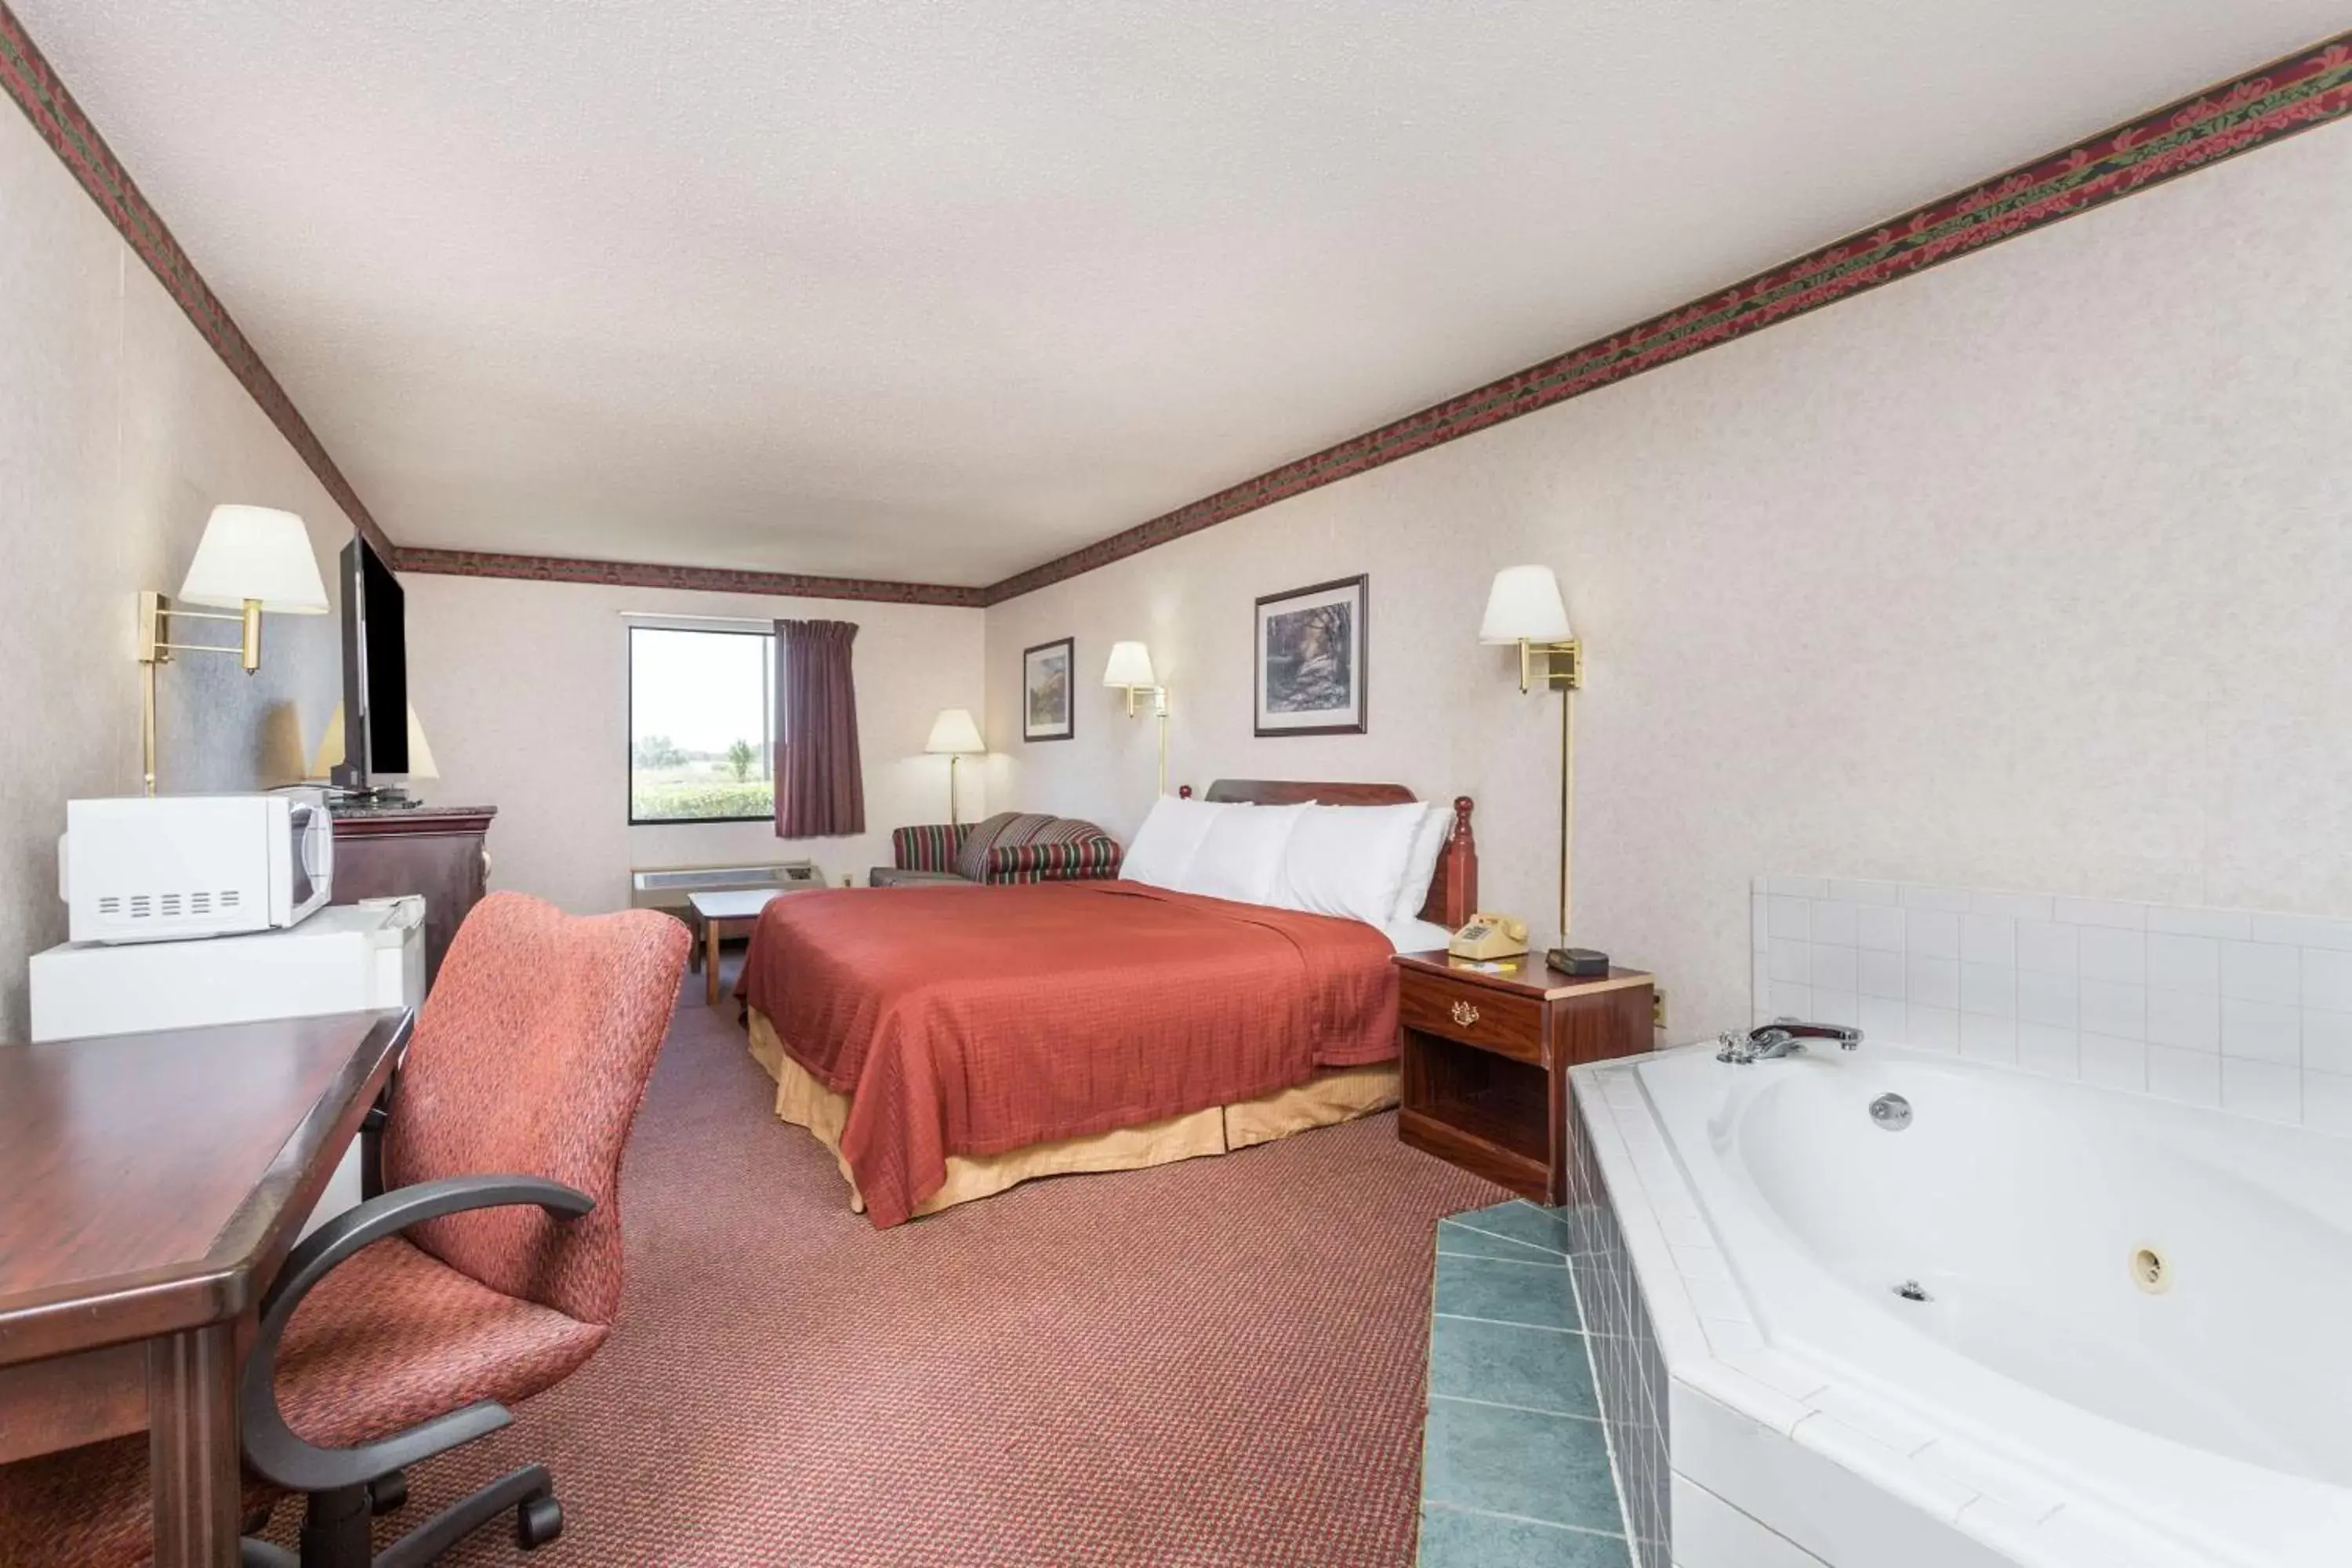 Deluxe King Room with Spa Bath - Non-Smoking in Days Inn by Wyndham Royston